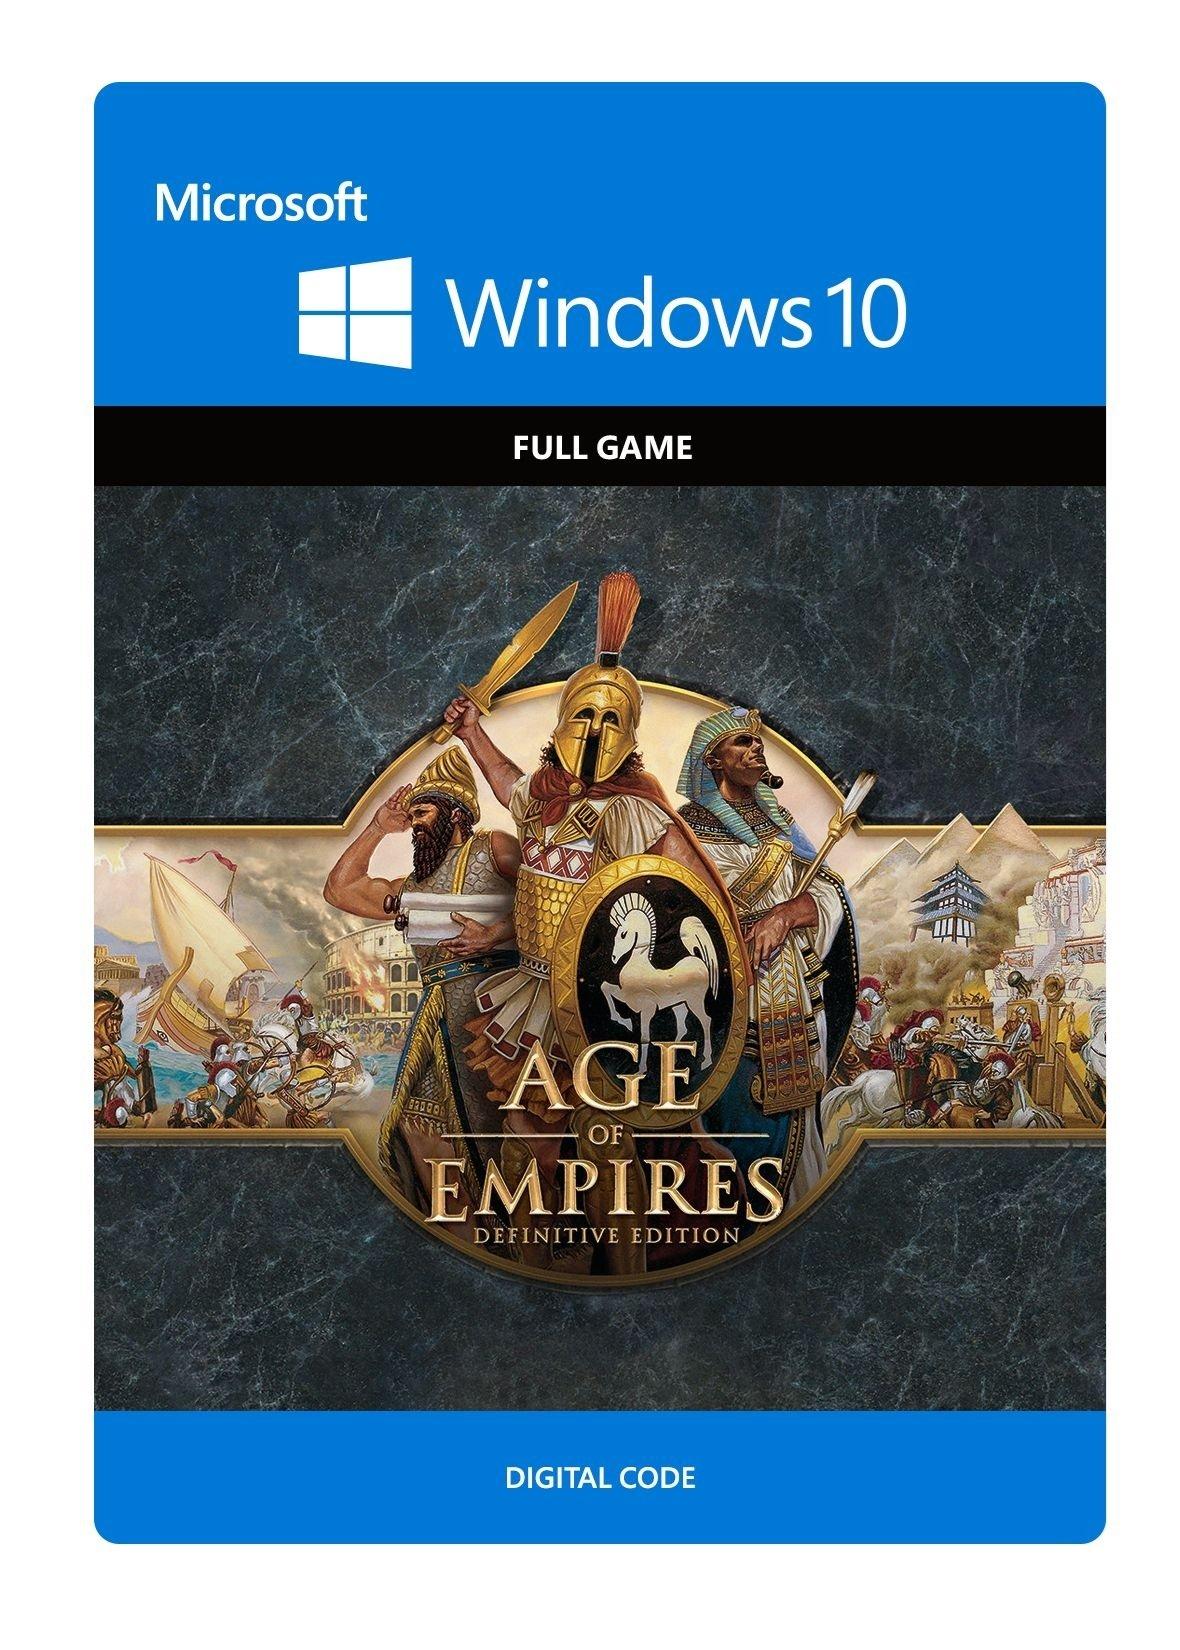 Age of Empires: Definitive Edition - Win10 - Game - Digital Only | 2WU-00009 (cebc8064-c2be-4847-be83-efd2845f72df)